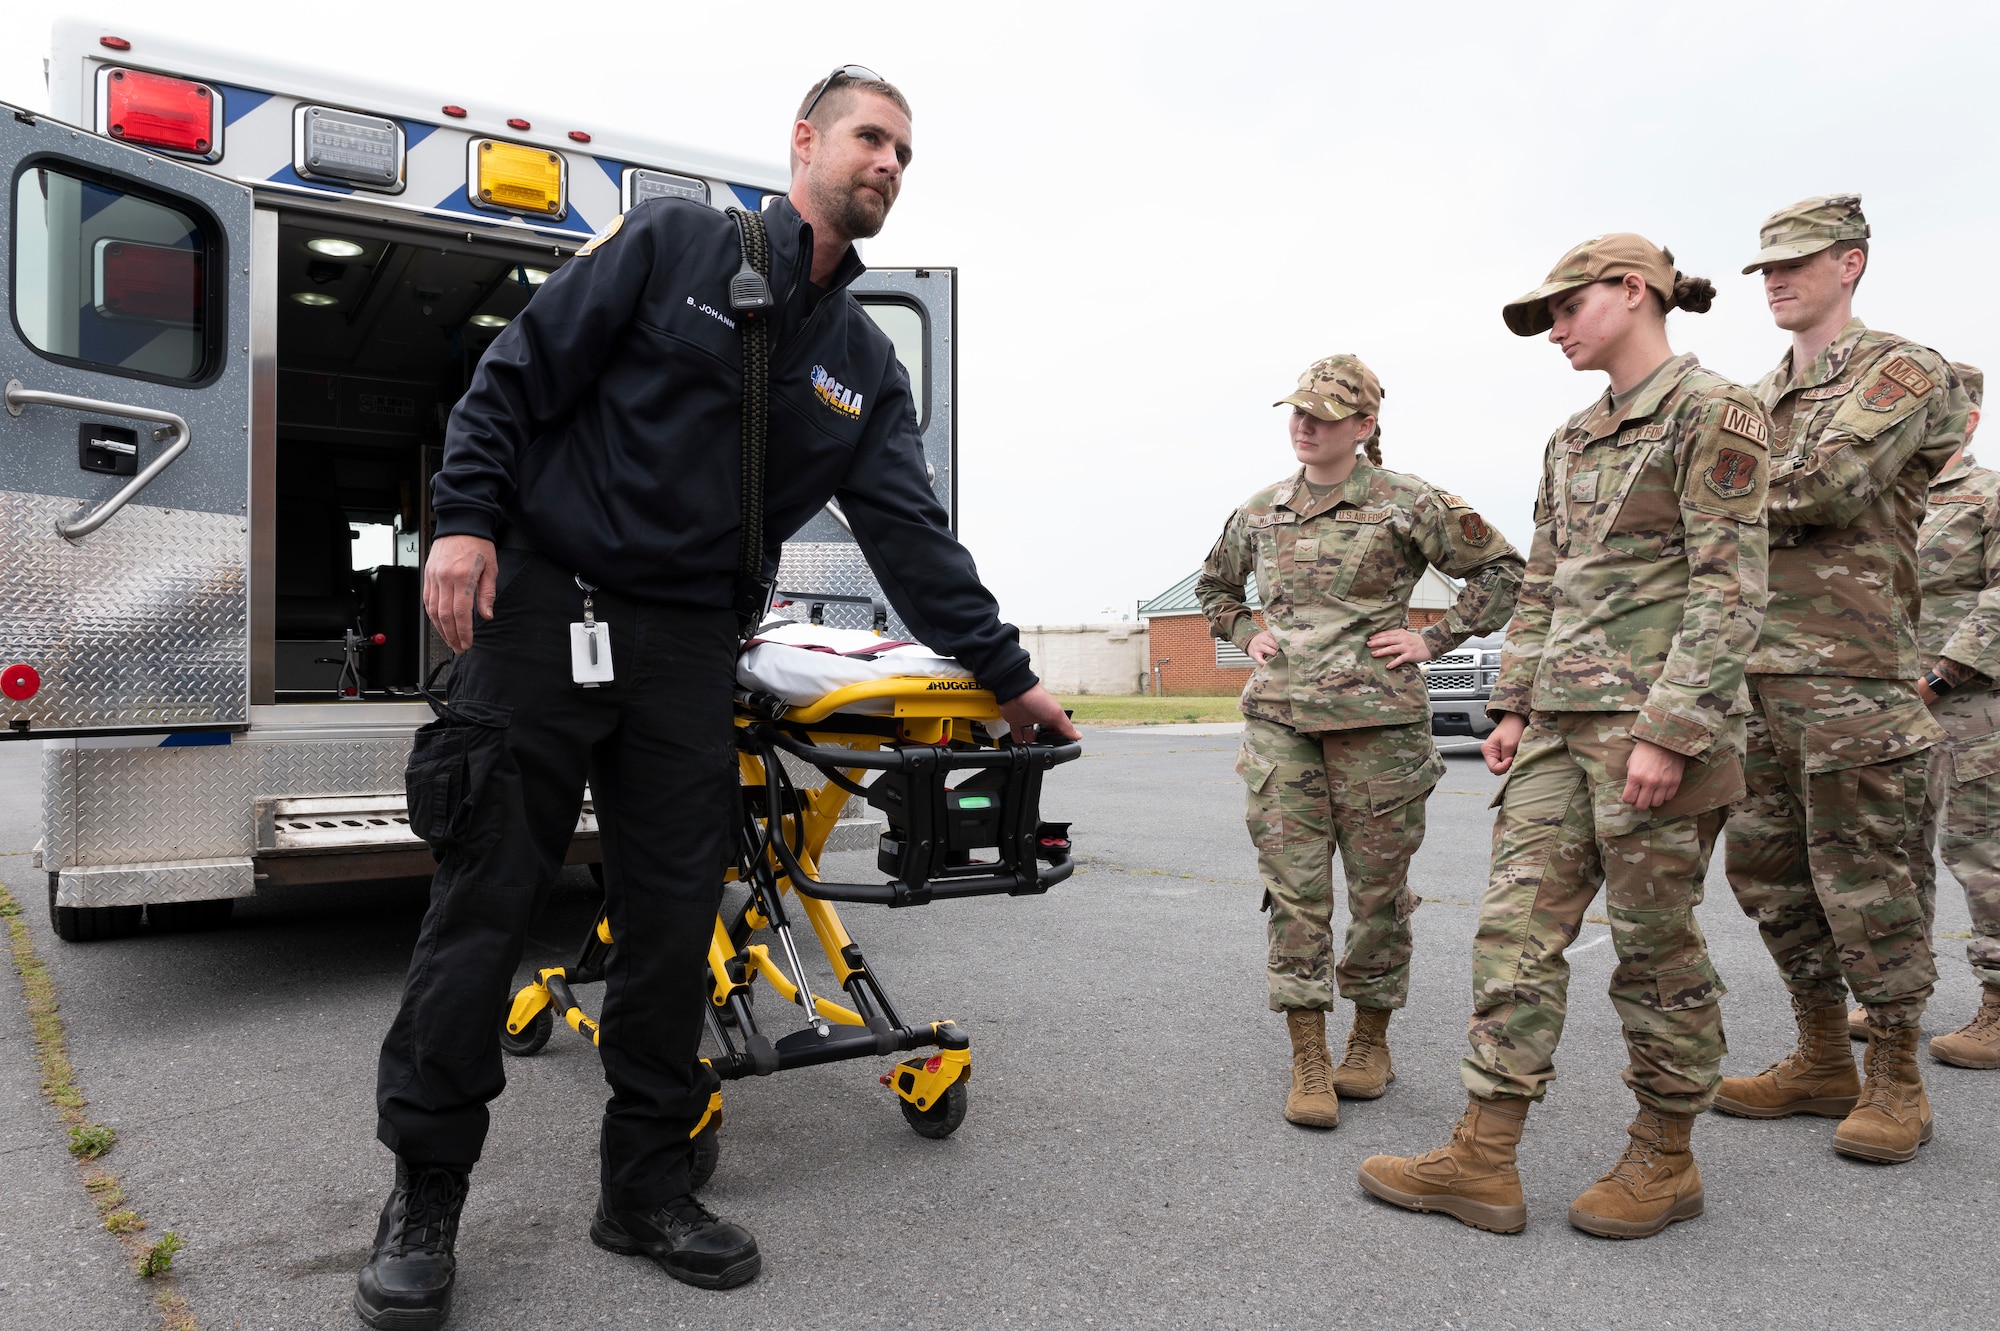 Bruce Johahn, and EMT with the Berkeley County Emergency Medical Services, provides stretcher and ambulance familiarization training to 167th Medical Group Airmen as part of of an extended unit training assembly at Shepherd Field, Martinsburg, West Virginia, June 9, 2023